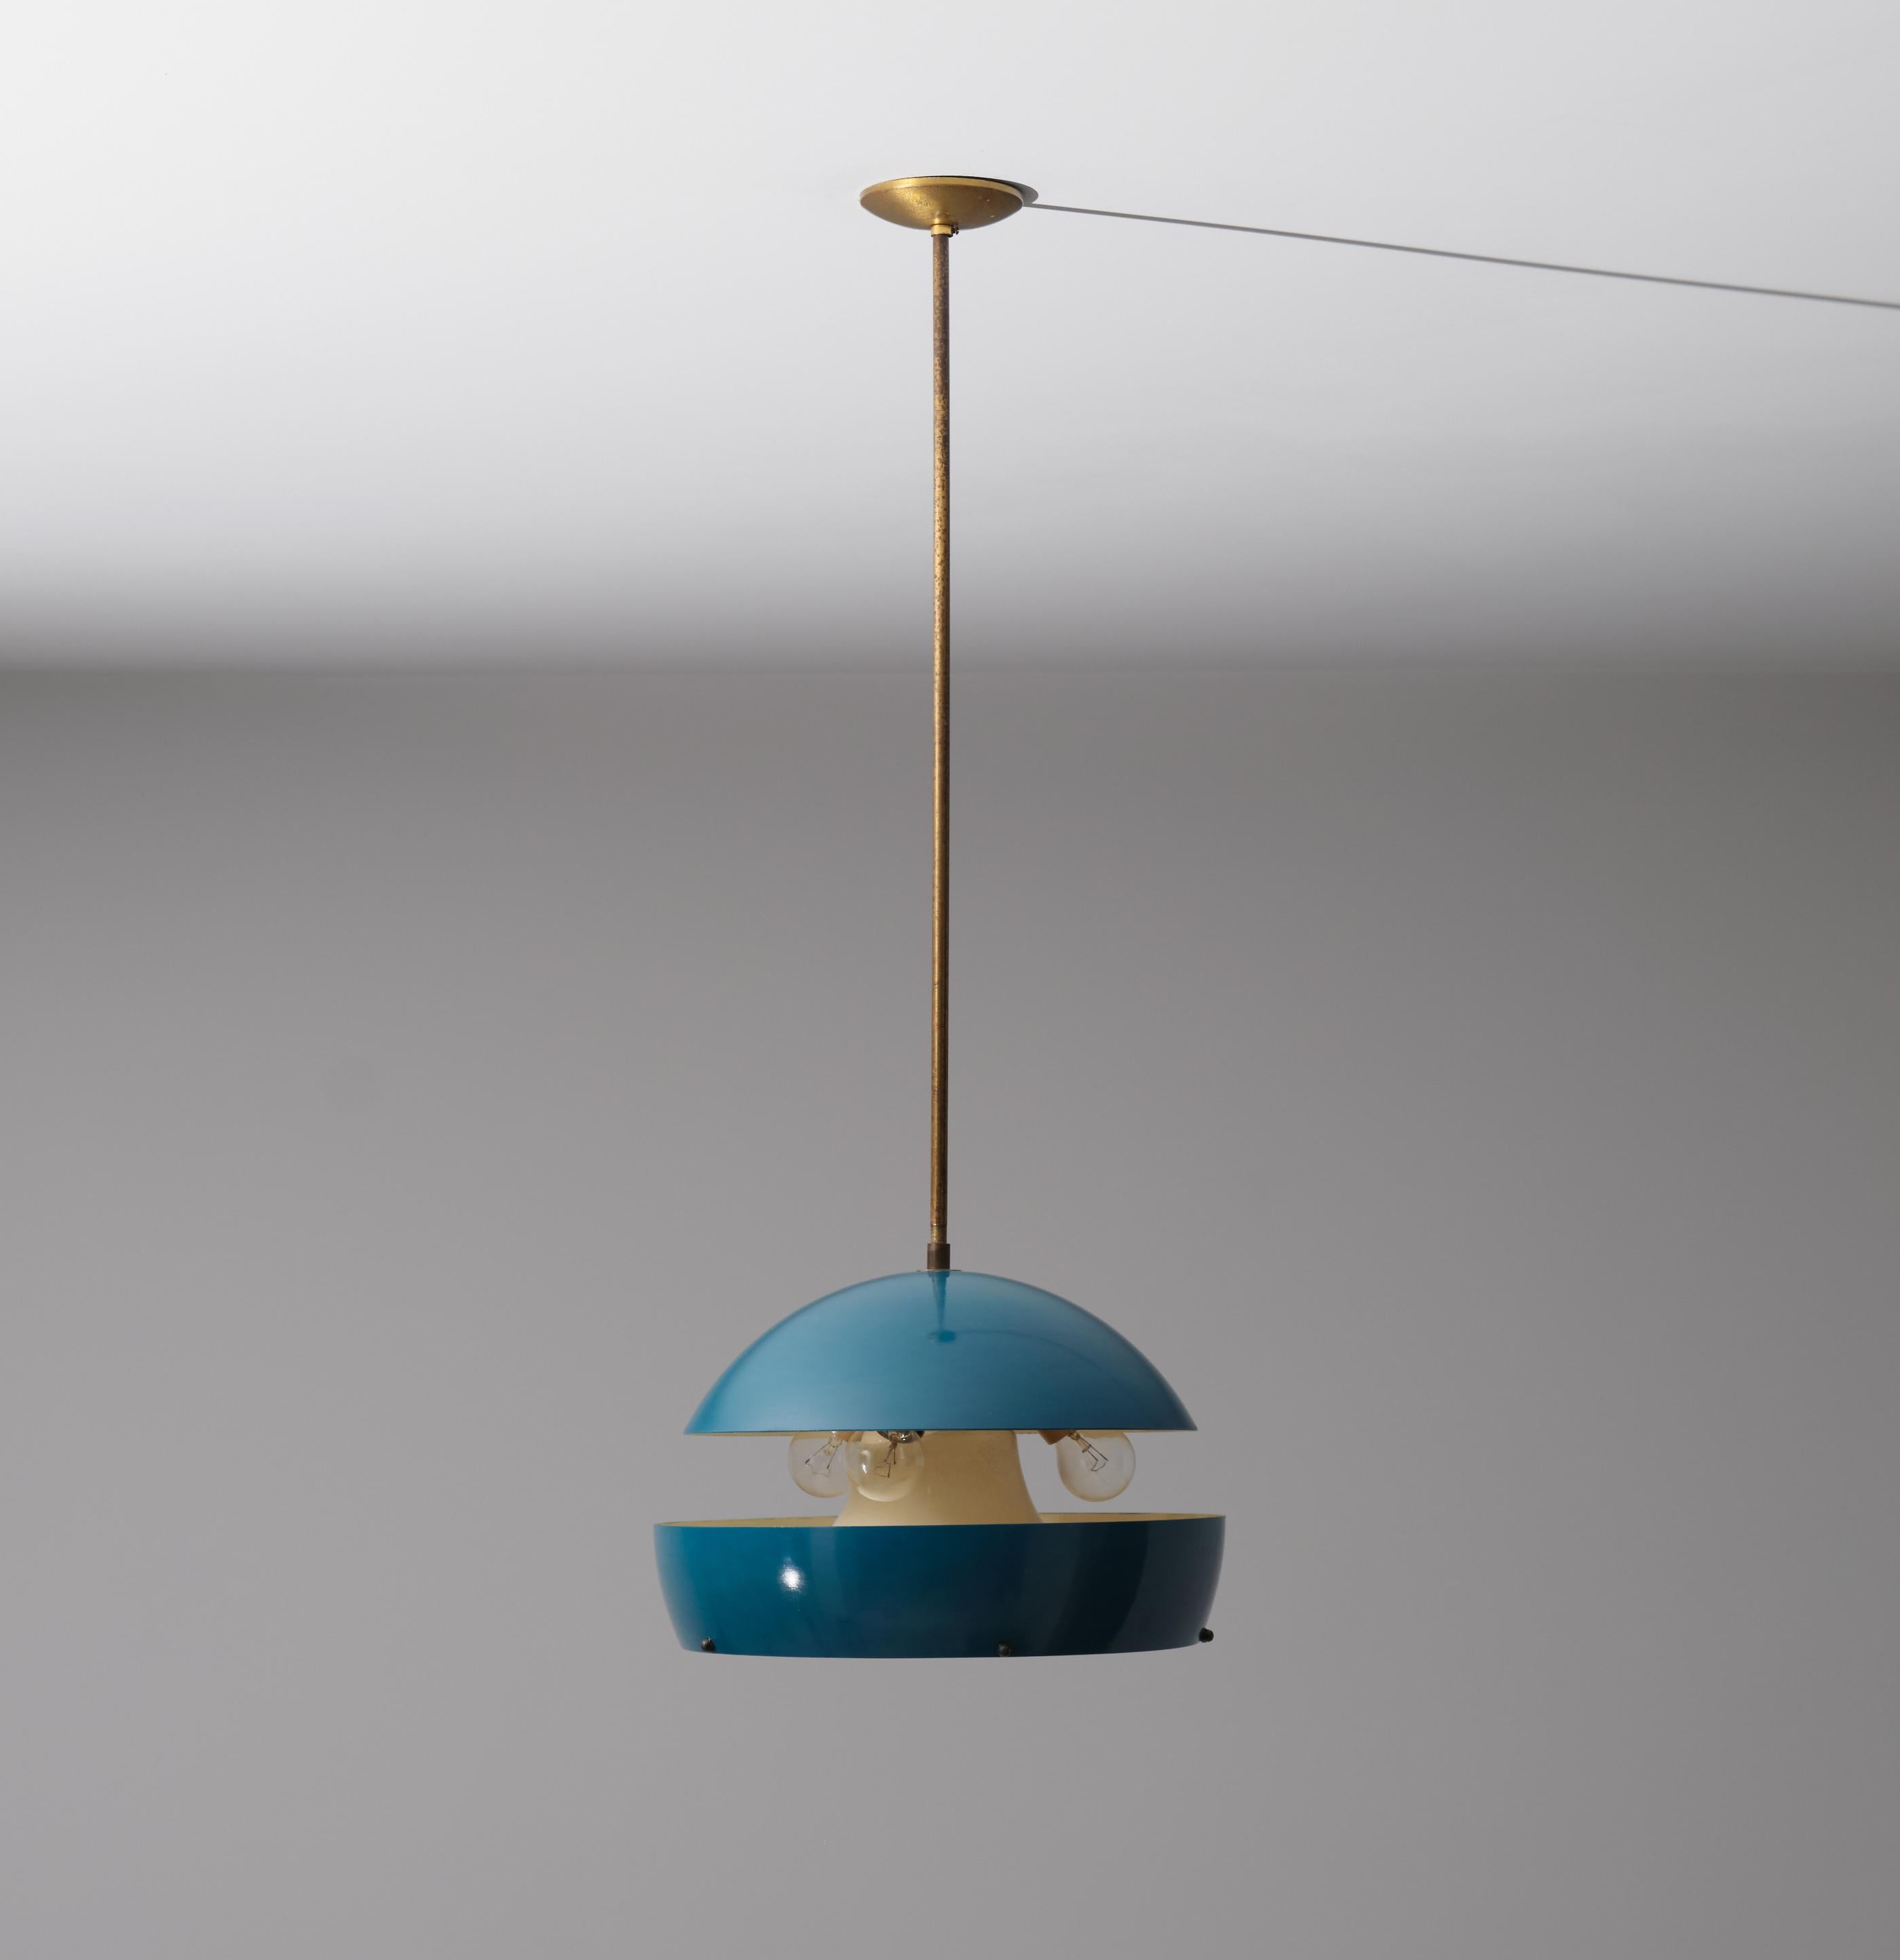 Italian pendant lamp manufactured in Italy during the 50s. 

Charming spherical pendant lamp, modern design and full of details.

Made of brass, blue lacquered metal externally and ivory white internally, also internally there are three adjustable